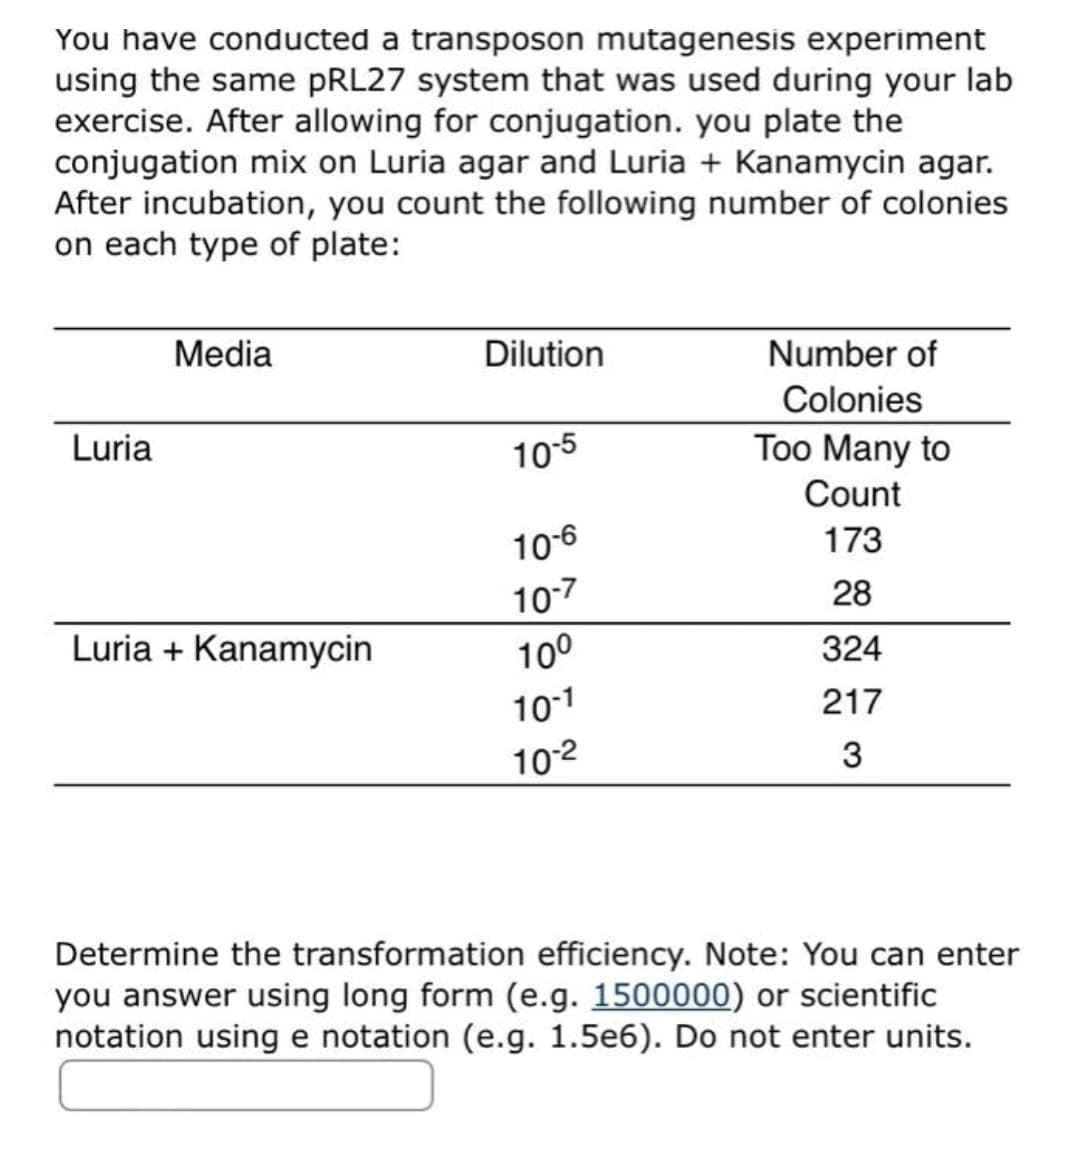 You have conducted a transposon mutagenesis experiment
using the same PRL27 system that was used during your lab
exercise. After allowing for conjugation. you plate the
conjugation mix on Luria agar and Luria + Kanamycin agar.
After incubation, you count the following number of colonies
on each type of plate:
Media
Dilution
Number of
Colonies
Too Many to
Luria
10-5
Count
10-6
173
10-7
28
Luria + Kanamycin
100
324
10-1
217
10-2
3
Determine the transformation efficiency. Note: You can enter
you answer using long form (e.g. 1500000) or scientific
notation using e notation (e.g. 1.5e6). Do not enter units.
